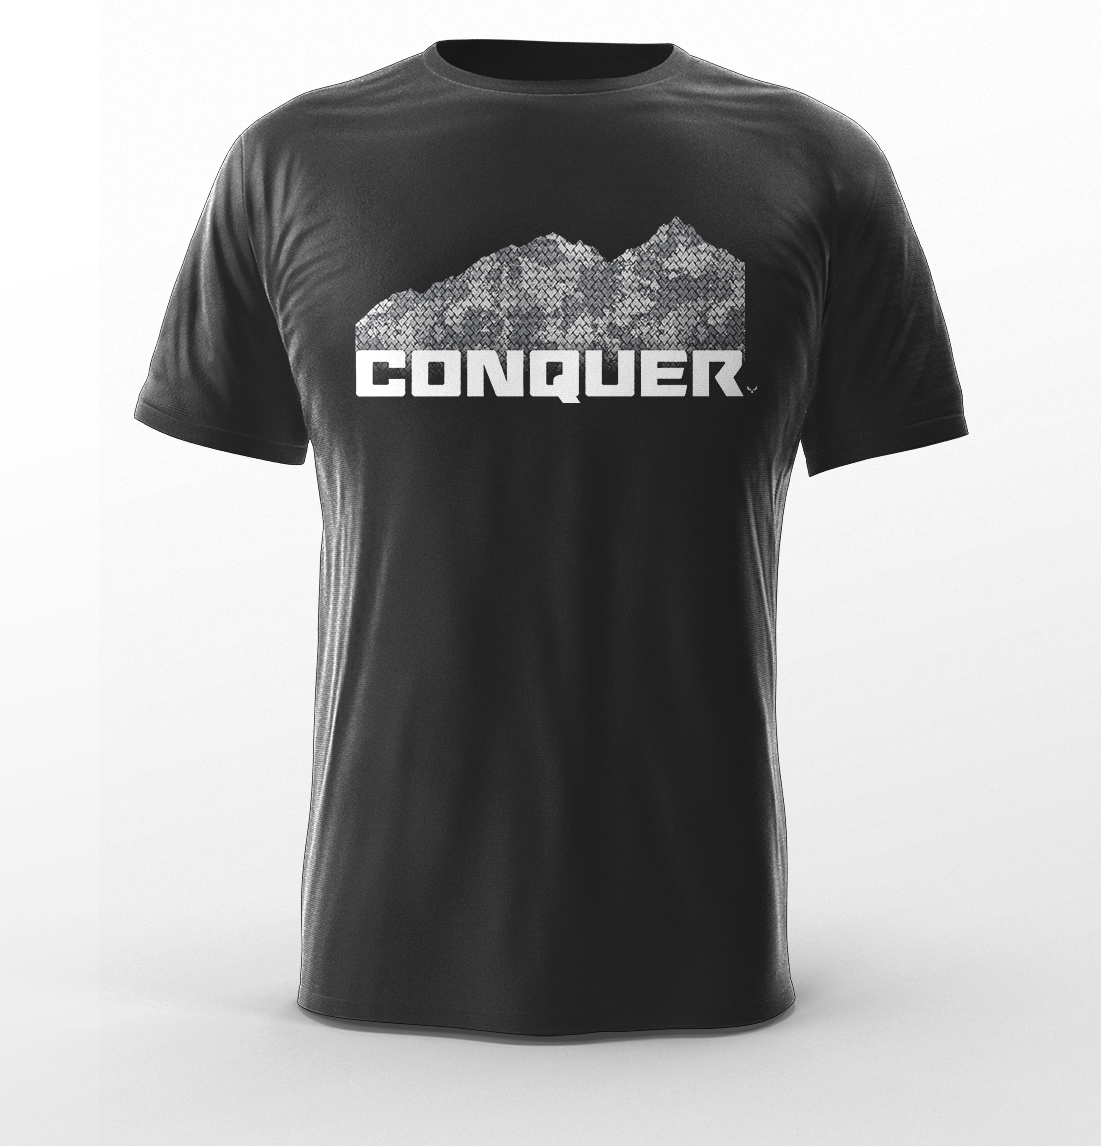 CONQUER Short Sleeve Unisex Poly Cotton Tee - Made in USA